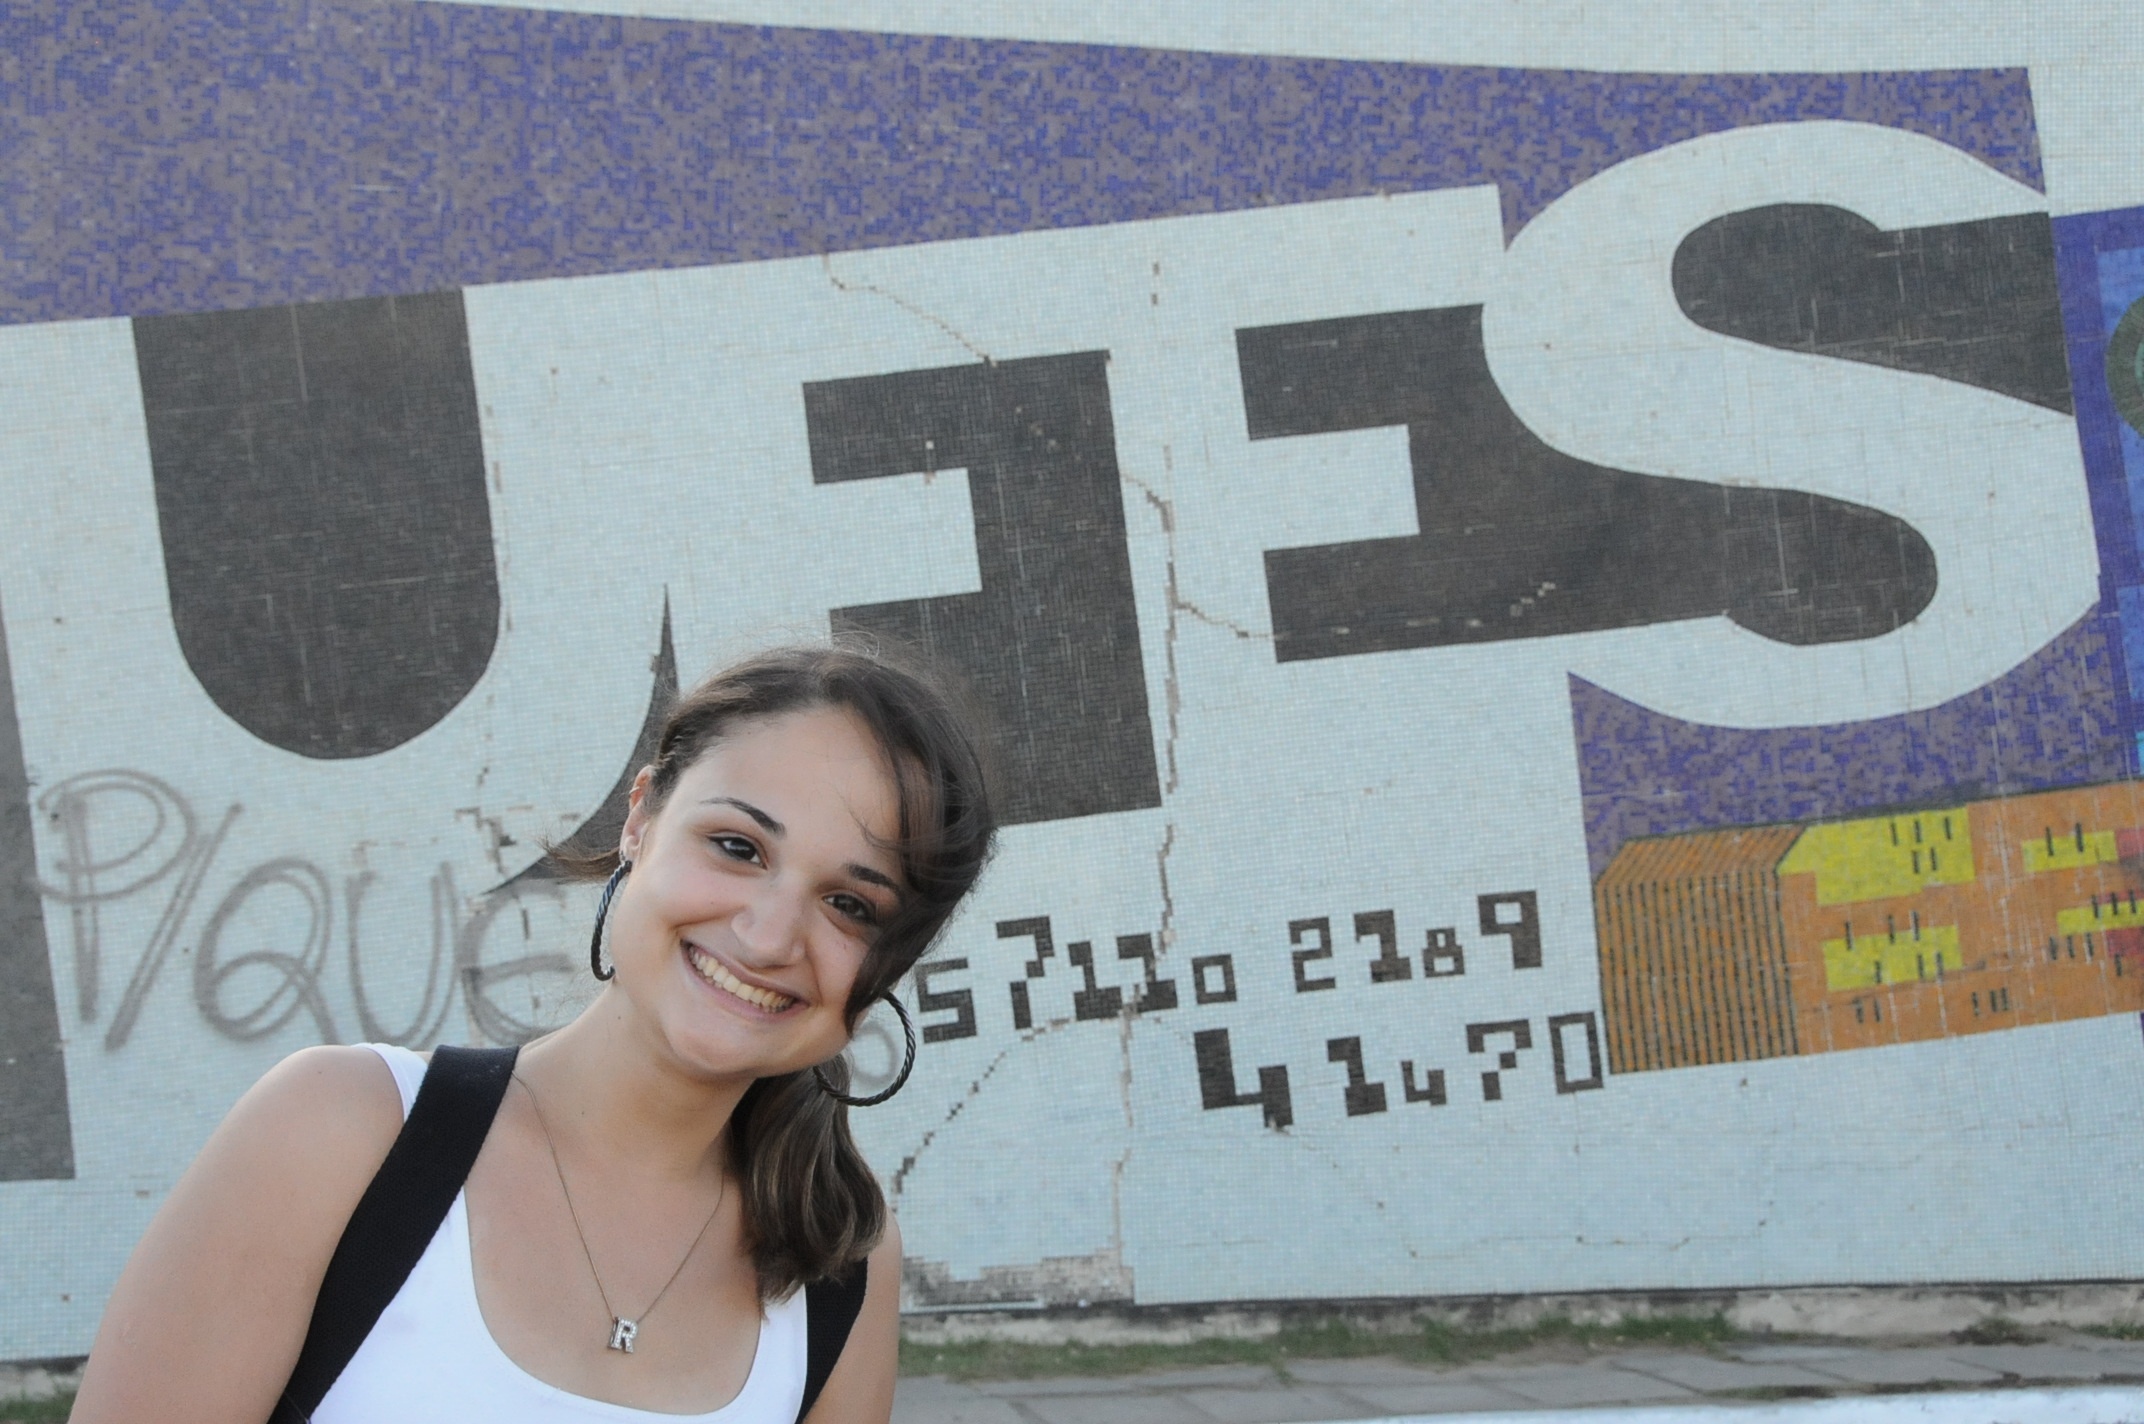 a young woman is posing in front of a graffiti - covered building